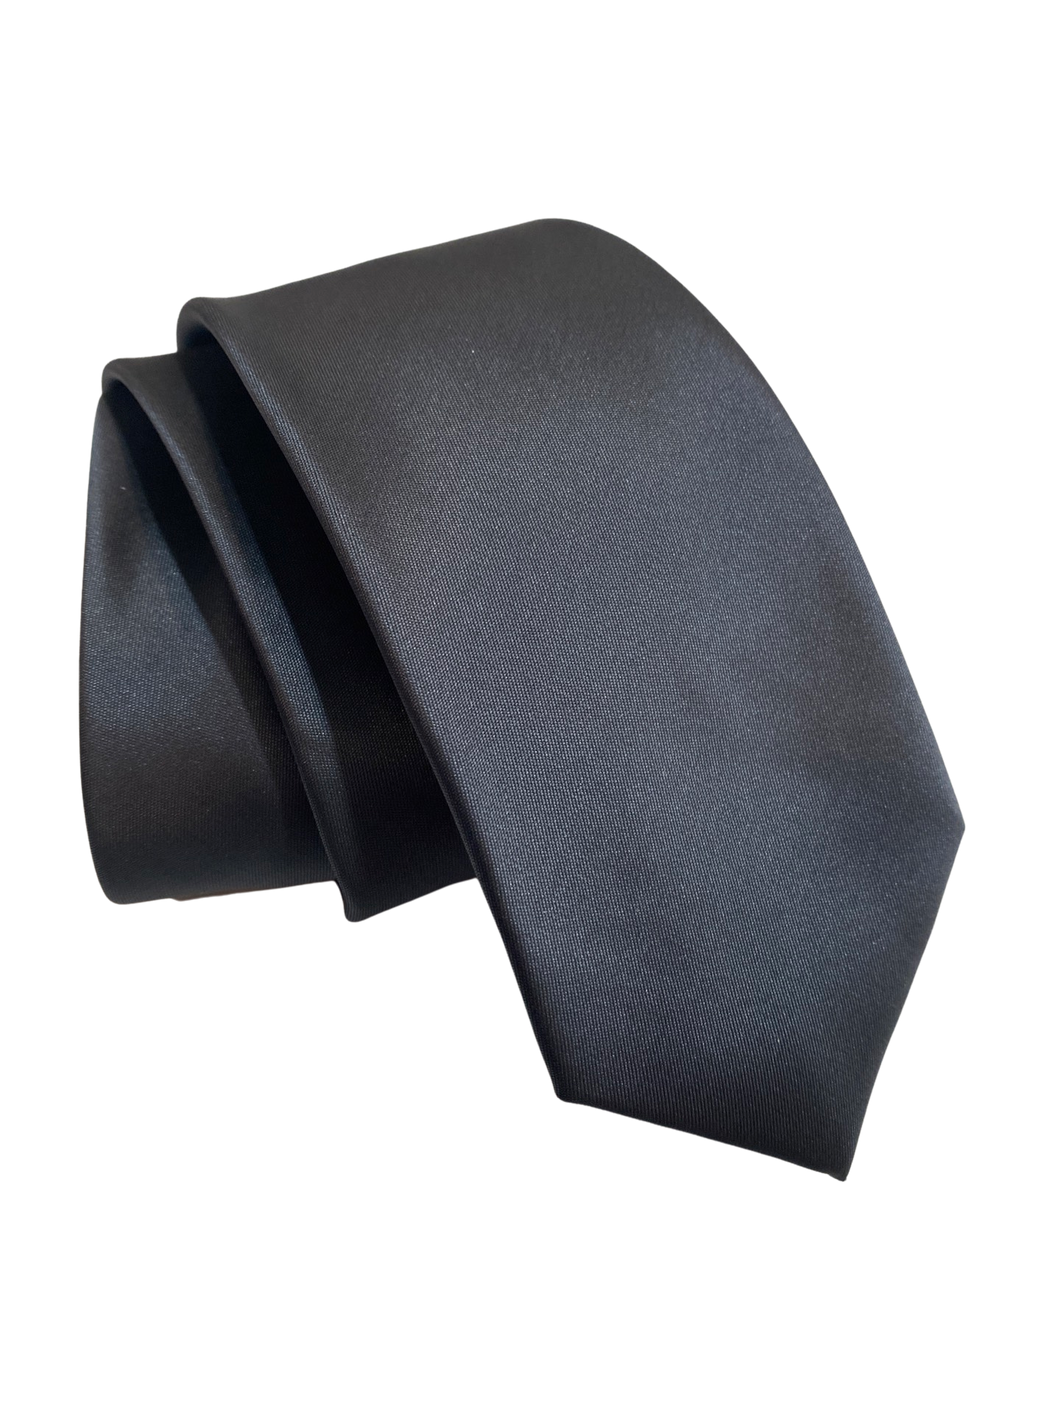 FX Fusion Charcoal Skinny Tie